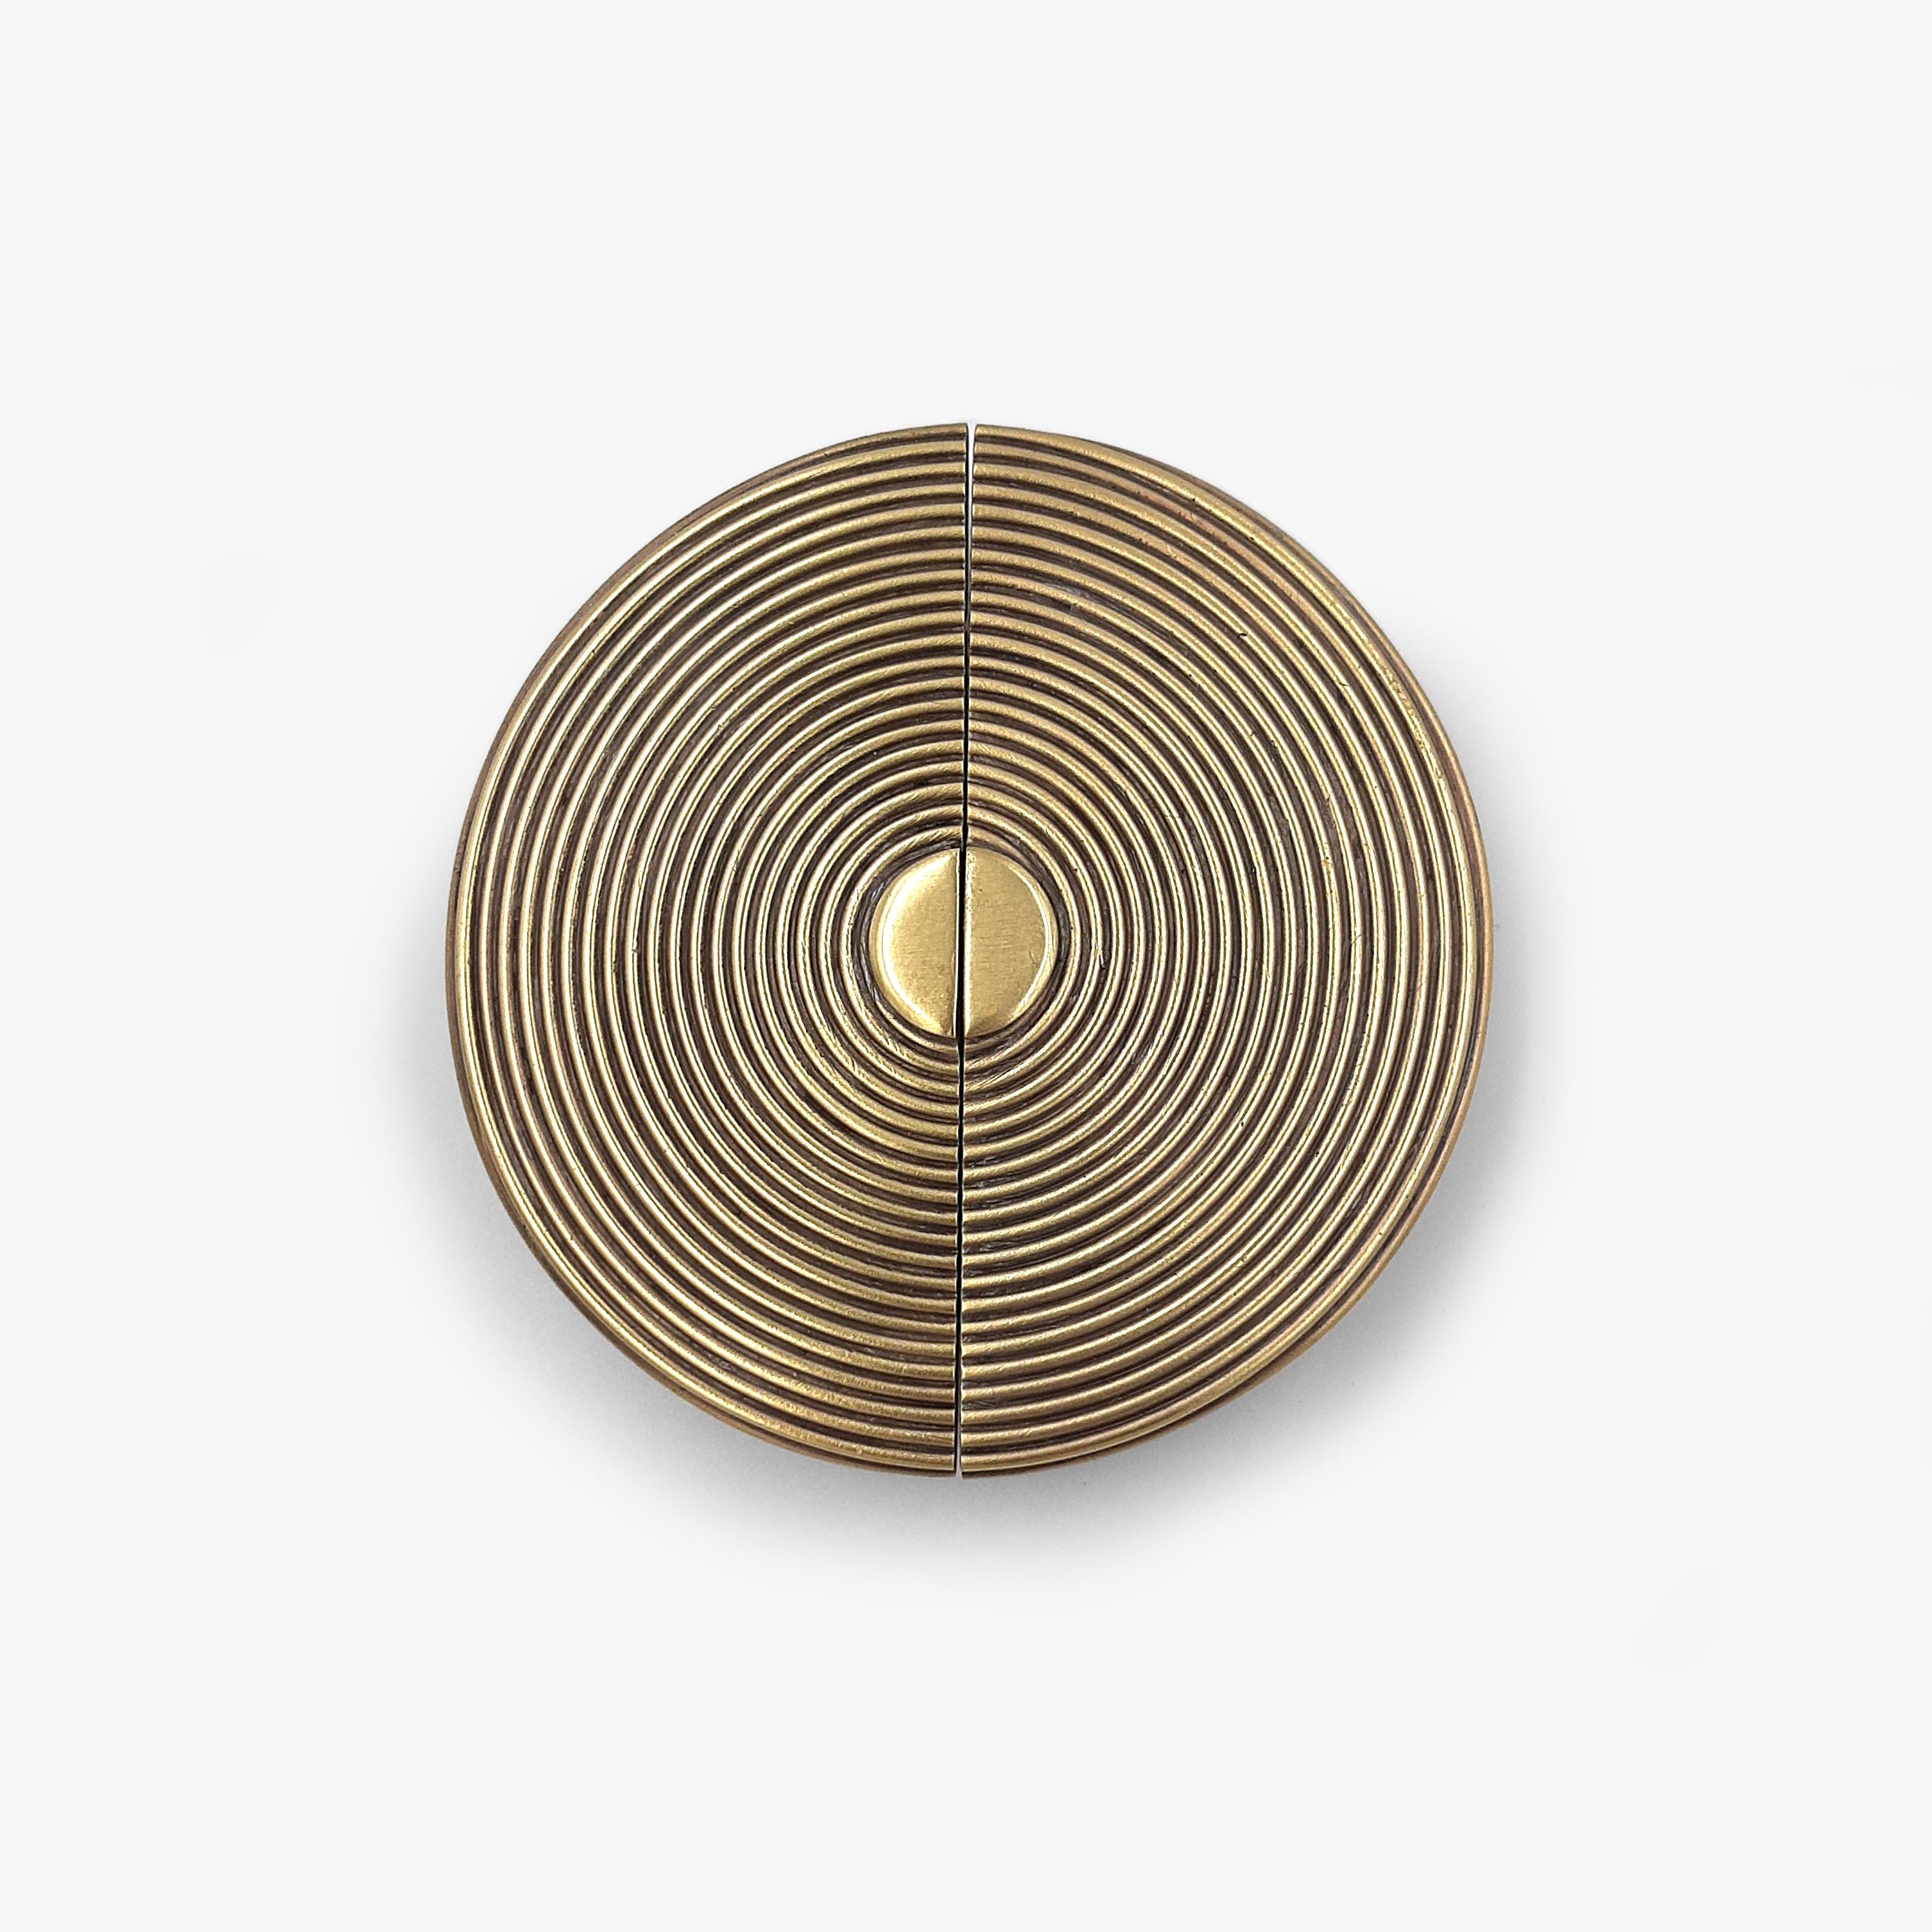 Solid brass pull handle with an oriental touch. Available in different sizes: Ø 12 cm , Ø 20 cm and Ø 30 cm
Fixture option available : facade fixing.